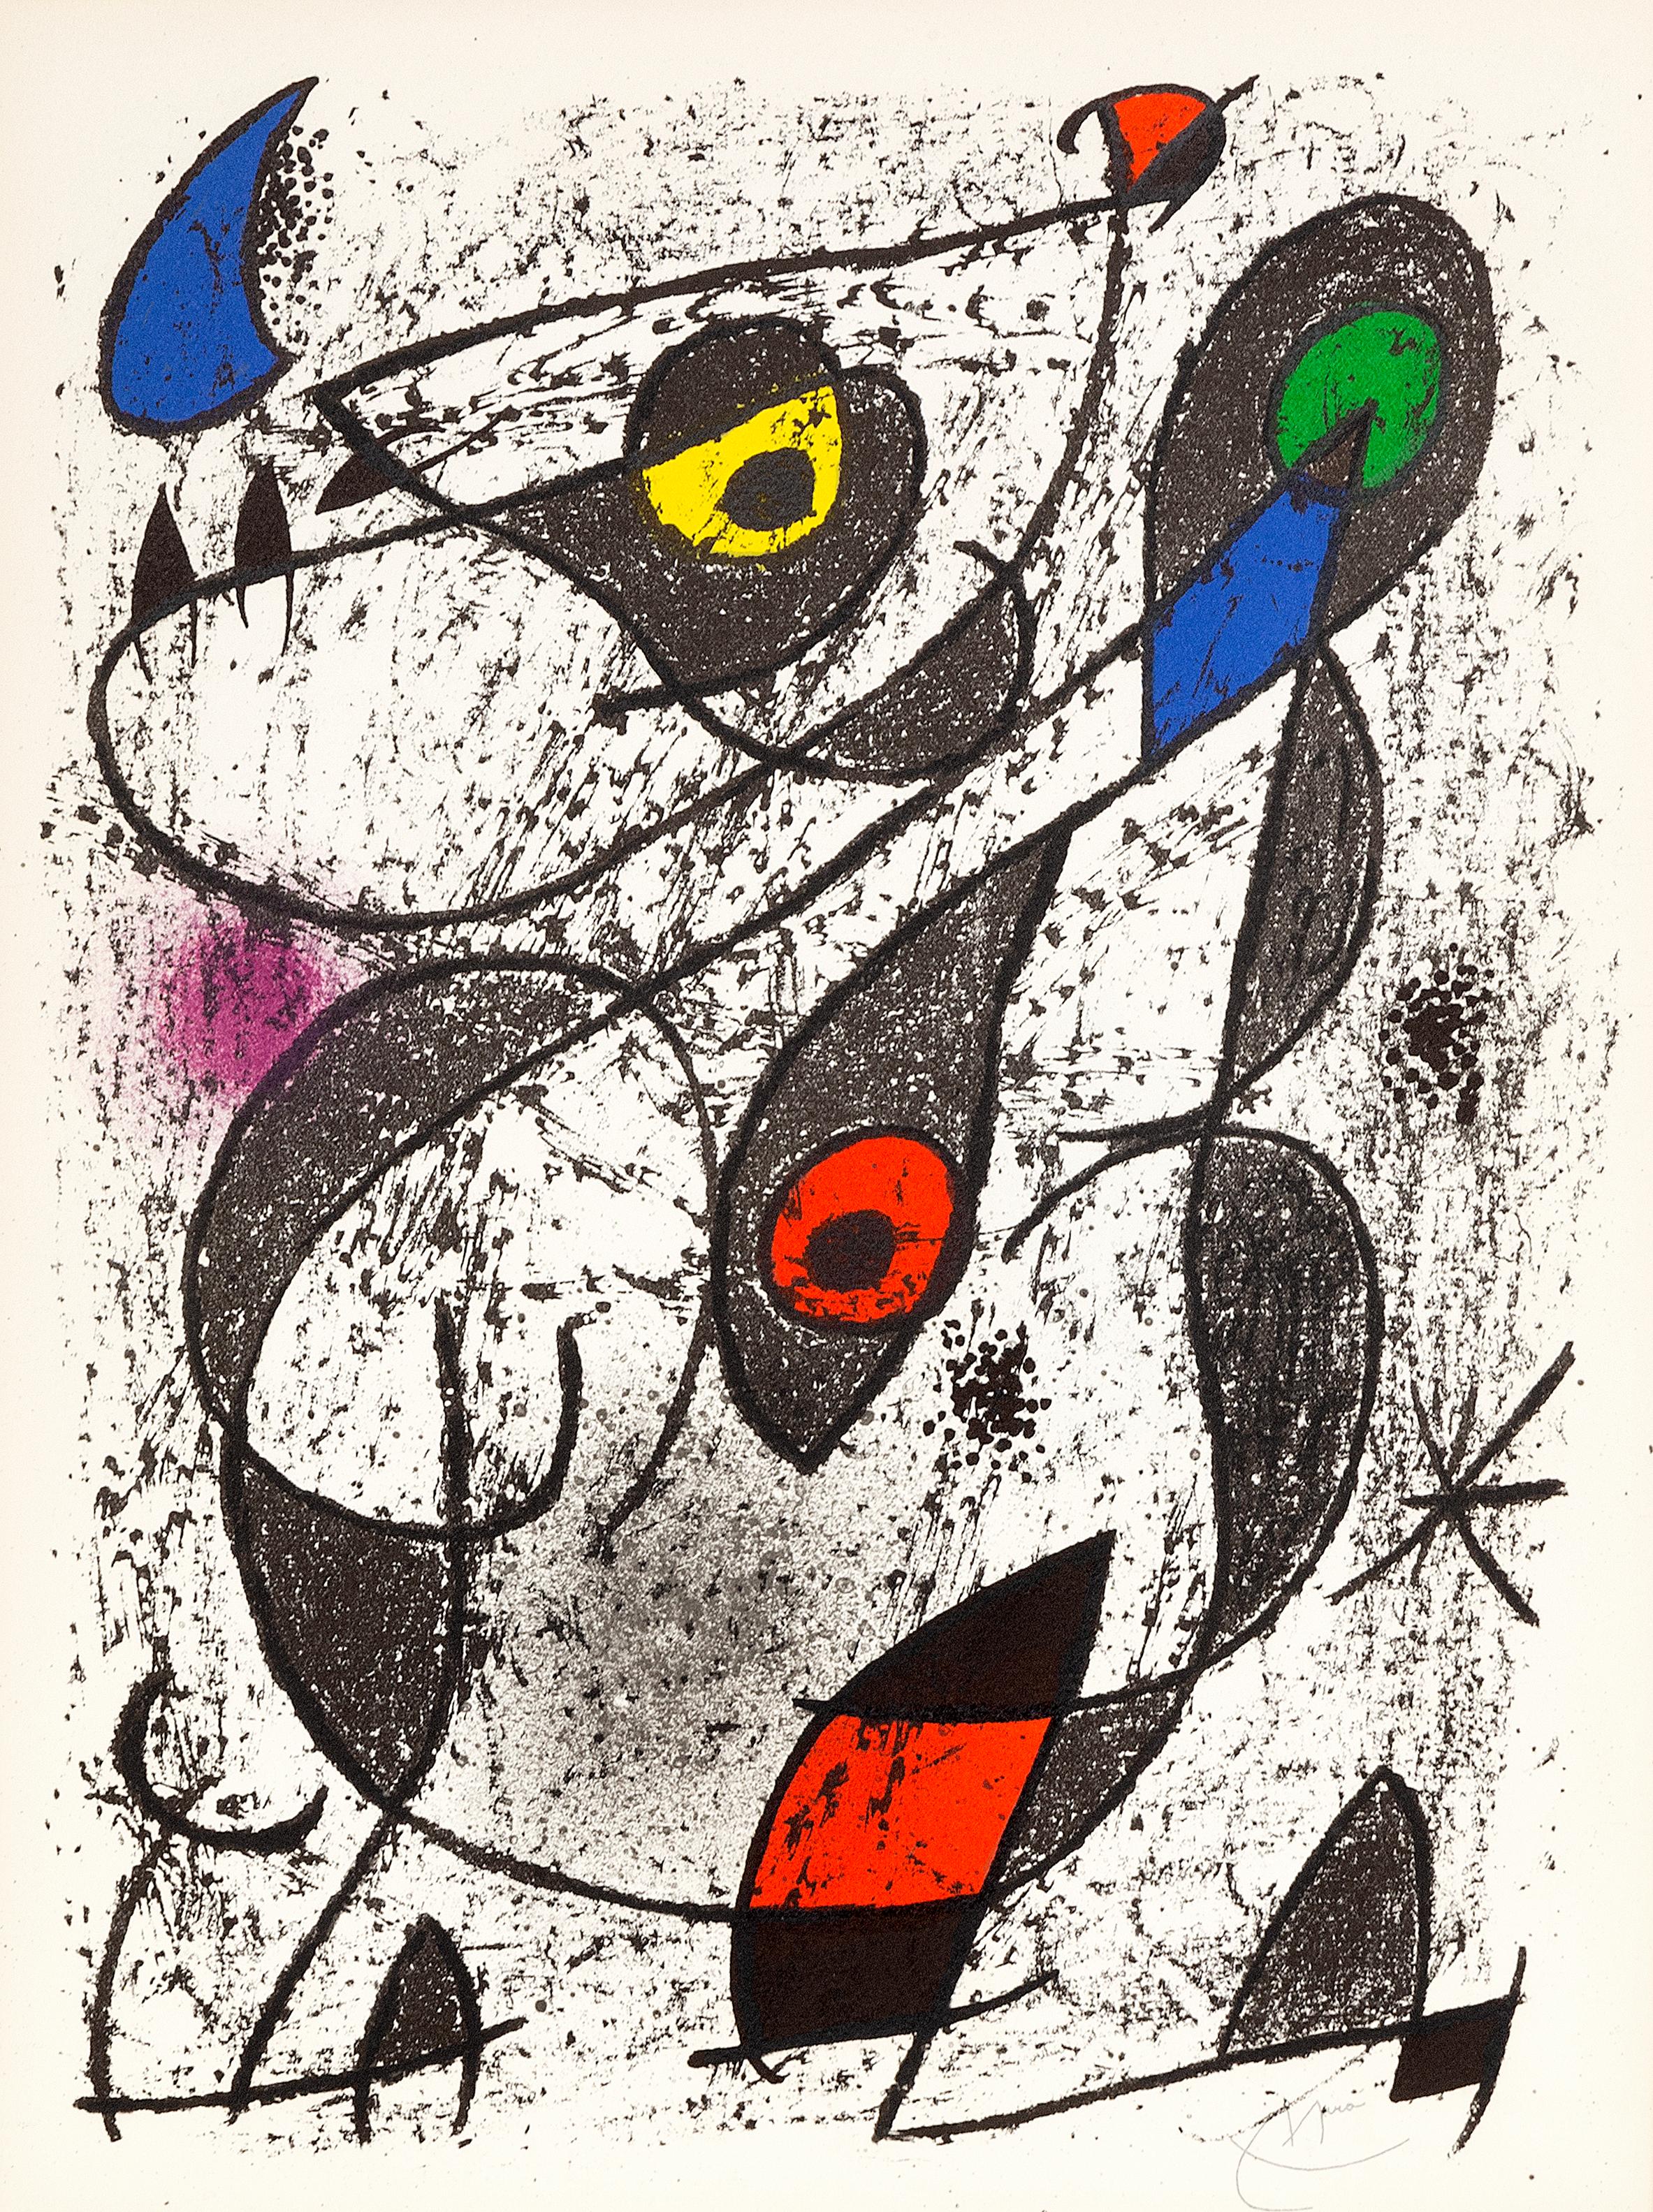 Miro a l'Encre II, Lithograph on Wove Paper from the Indelible Miro - Print by Joan Miró